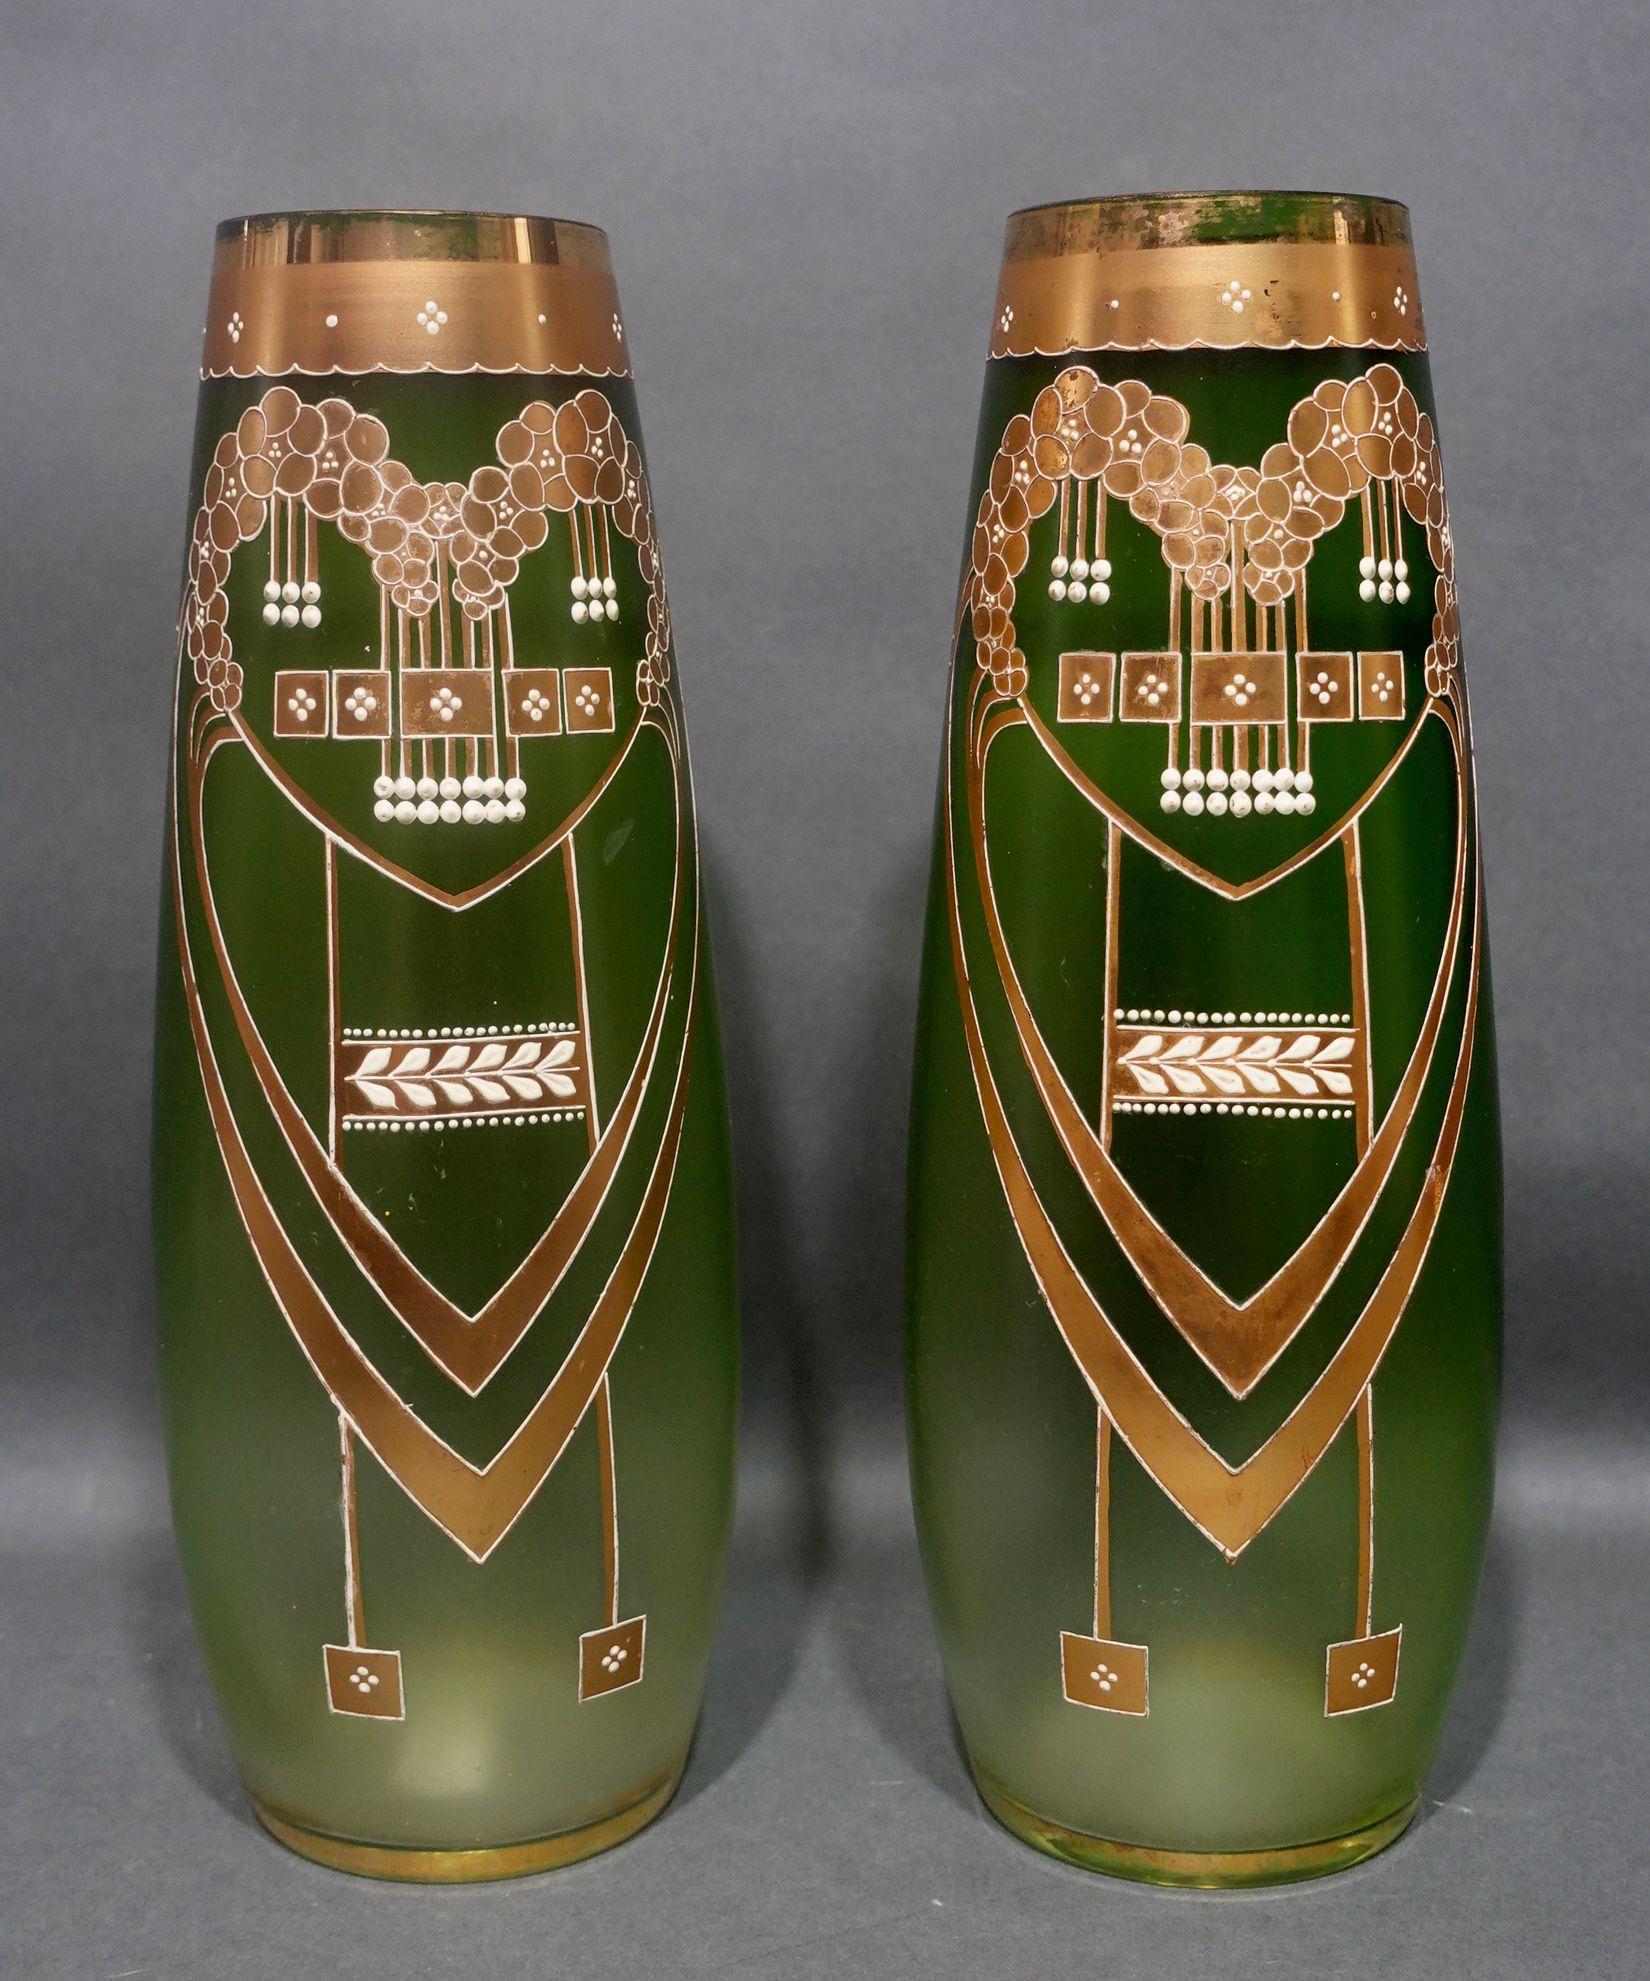 A Pair of Green Glass vases of Art Nouveau style with Enameled and Gilt Art Glass Vases formed very elegant shapes with subtle curved lines.